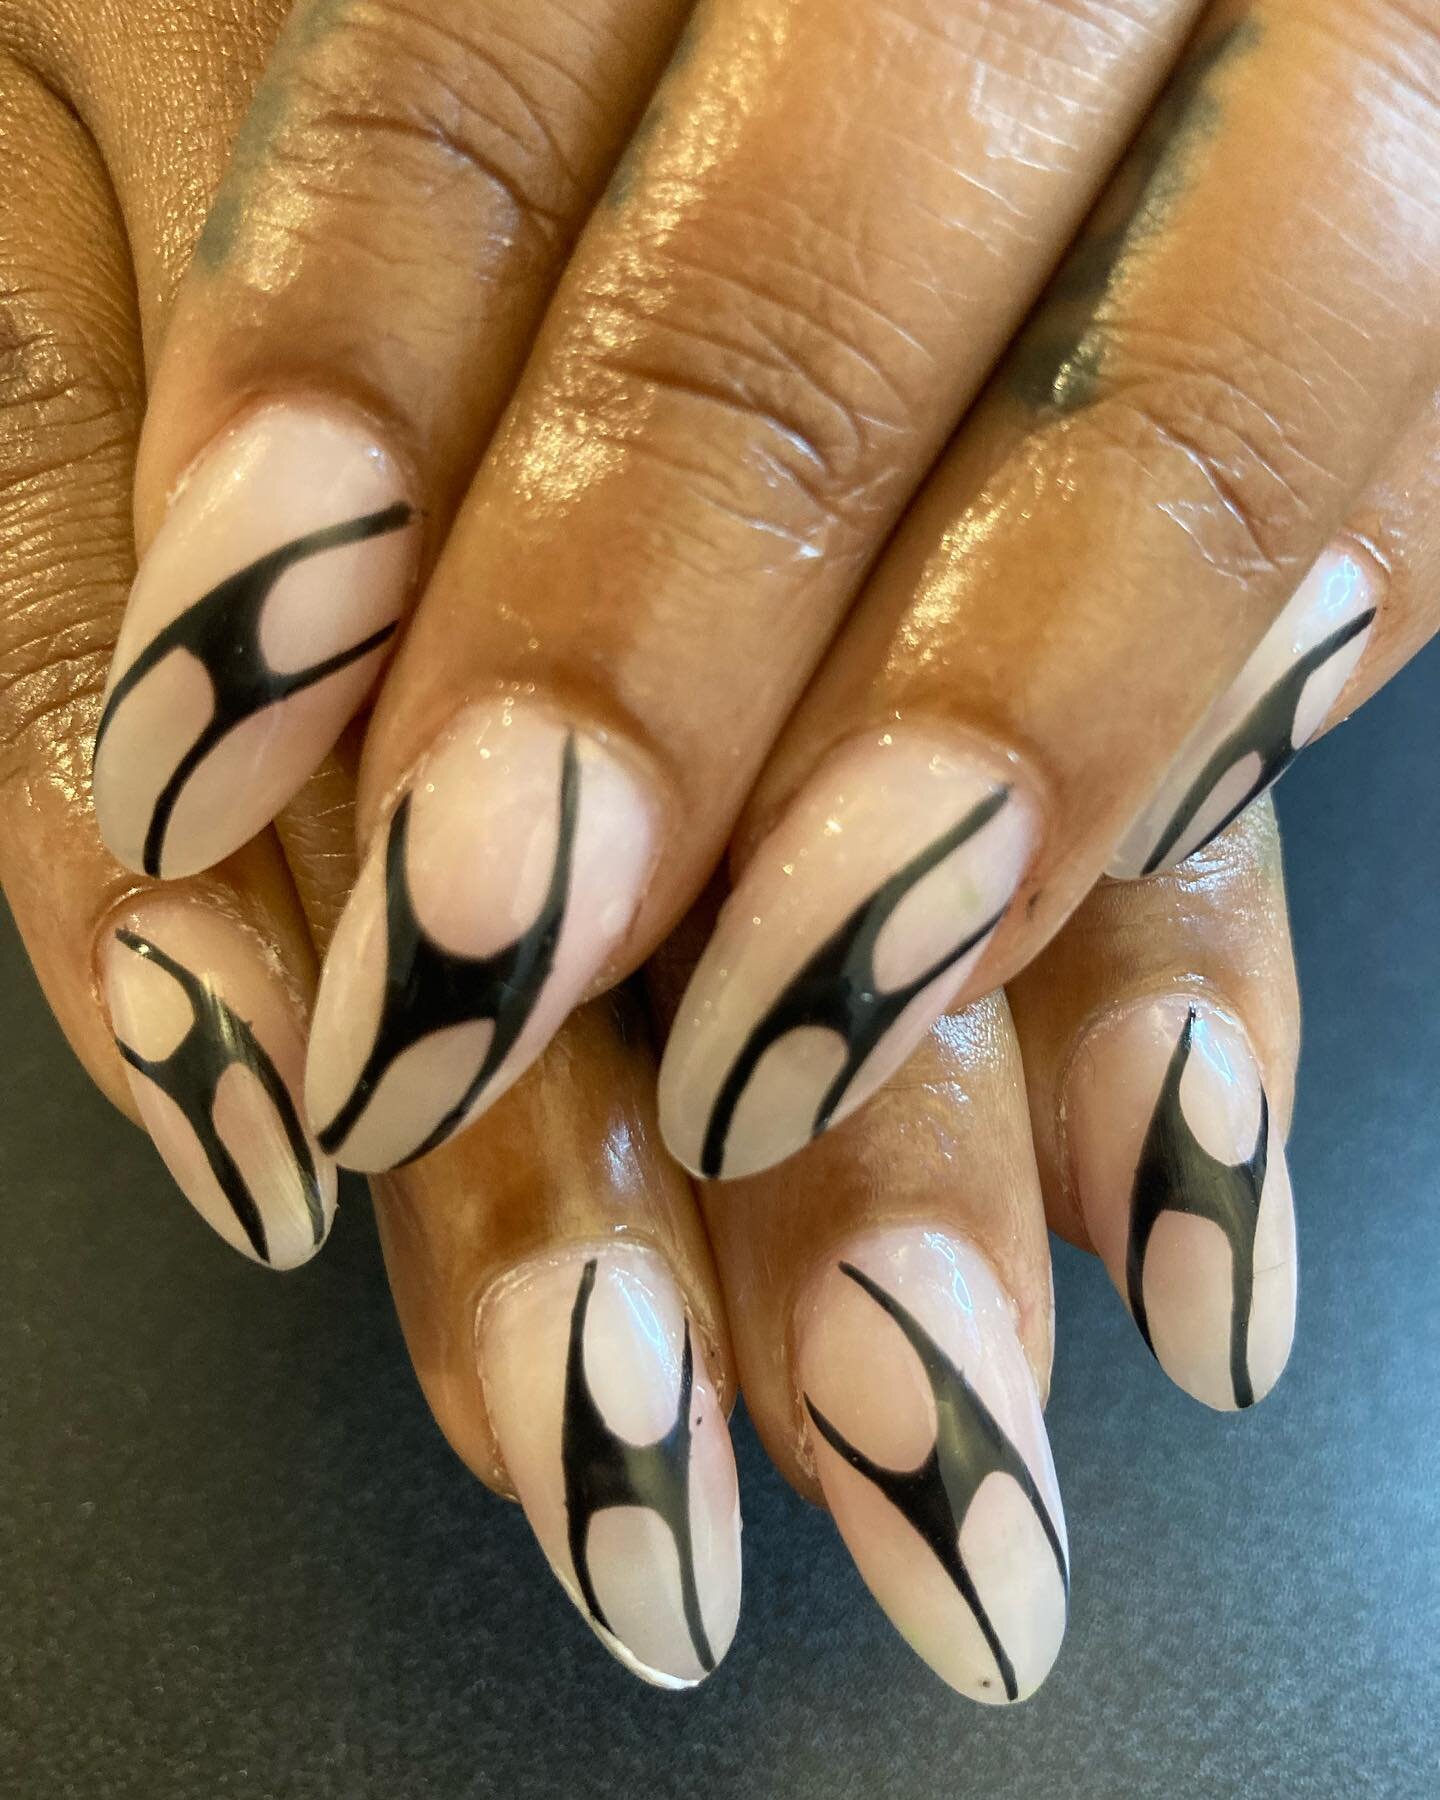 Happy holidays! 

🥂There&rsquo;s a few slots left this Saturday. 
Book online or text to schedule.🥂

#polygelnails #polygel #nudenails #nailart #nailartist #almondnails #nailstyle #blacknailtech #nailstylist #nycnails #naildesigns #nails #instanail